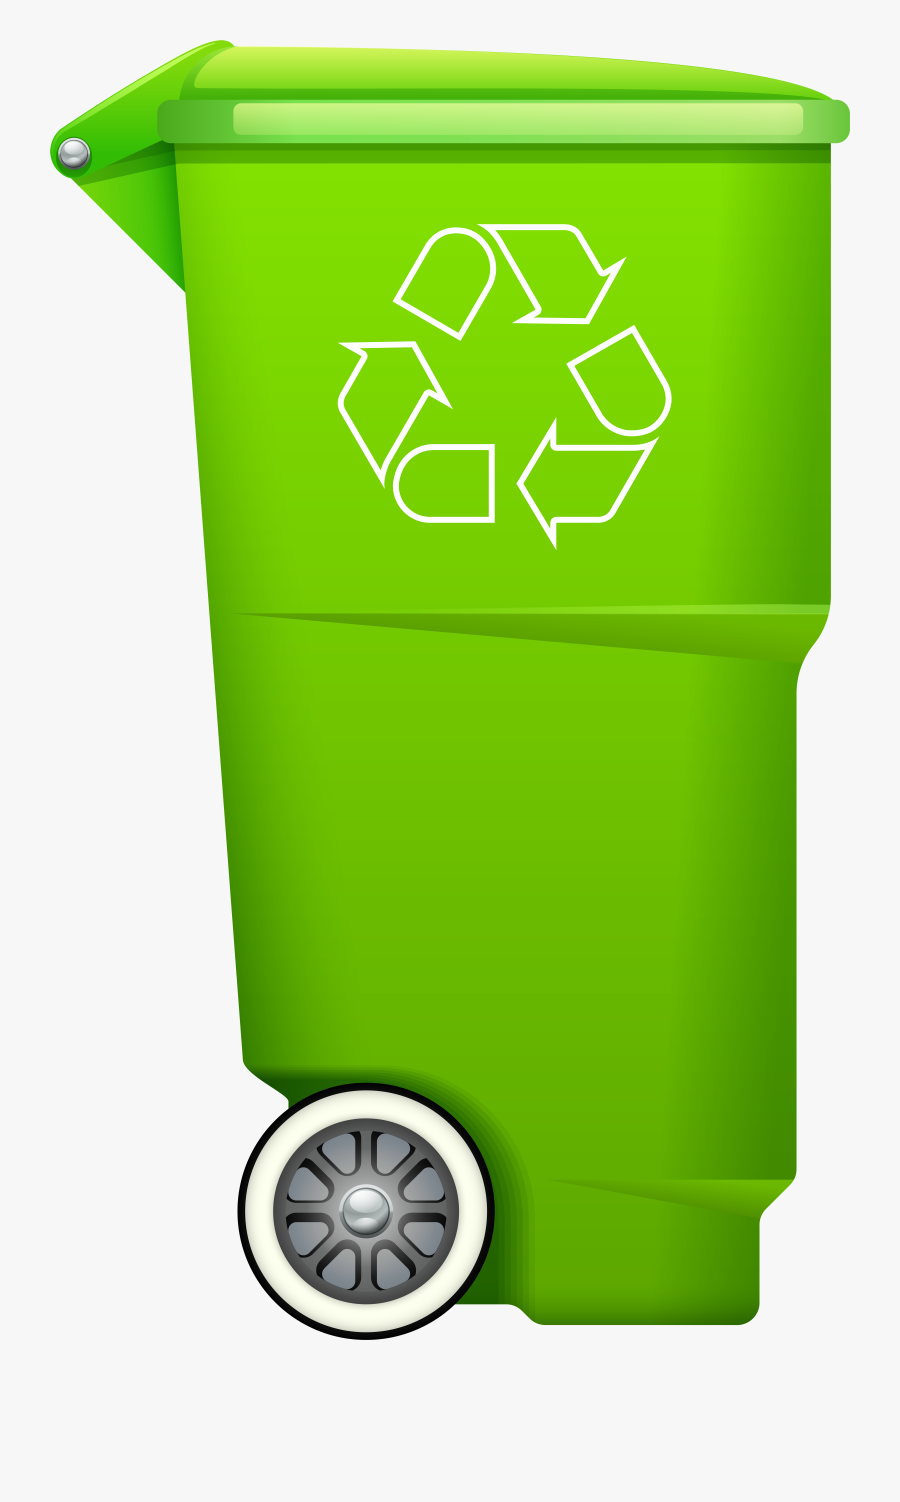 Garbage Trash Bin With Recycle Symbol Png Clip Art - Recycle Bin Clipart Png, Transparent Clipart